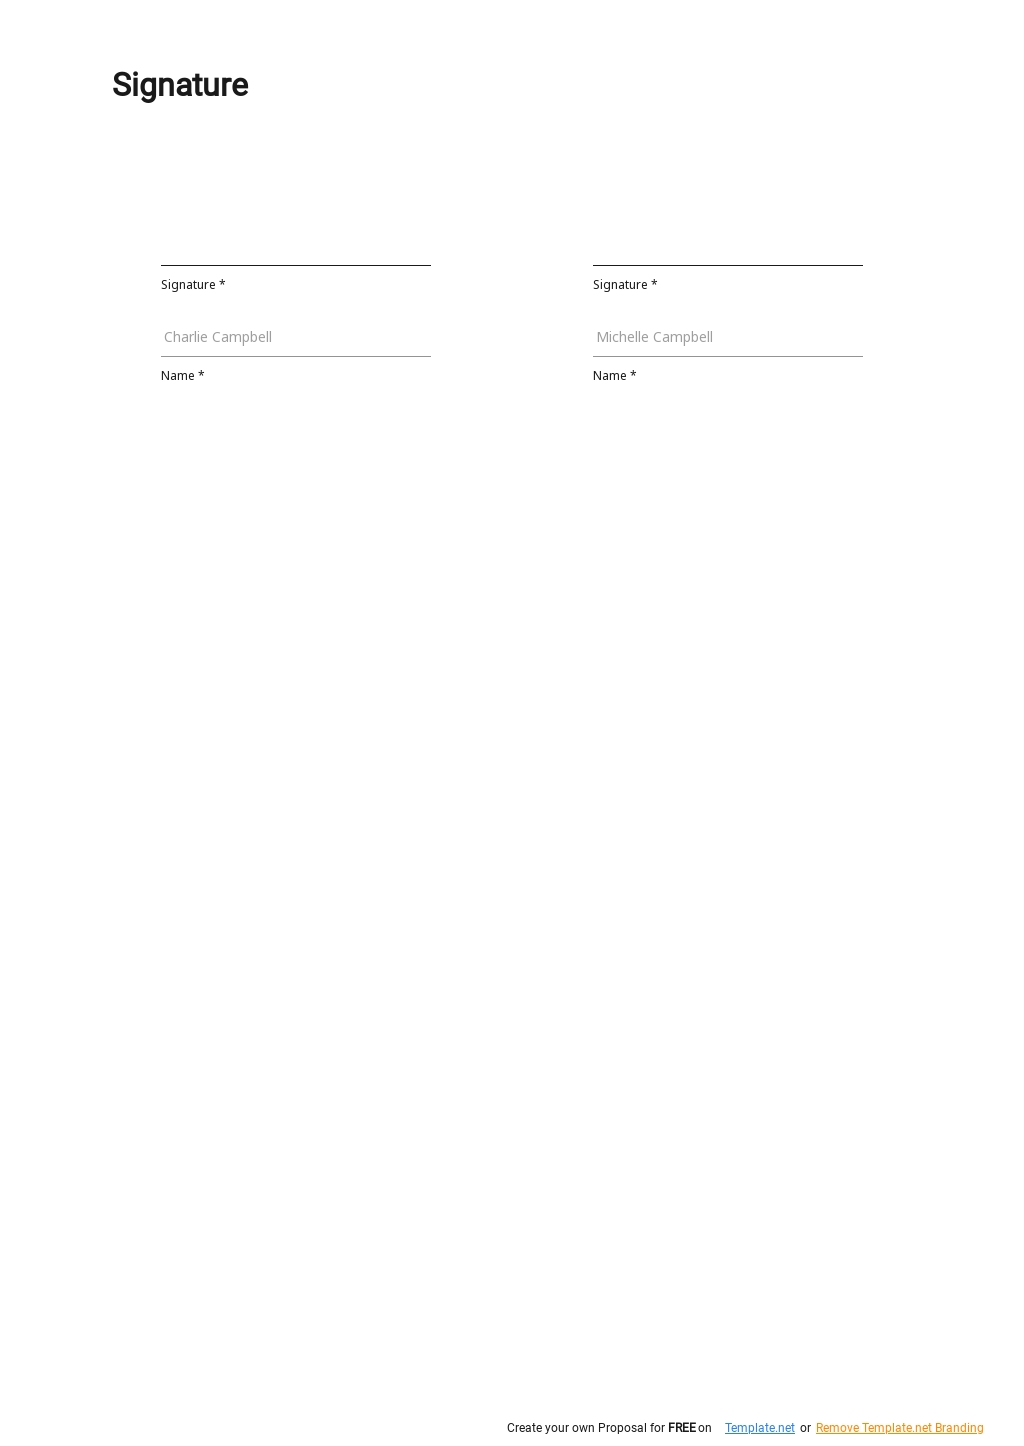 Child Support Payment Agreement Template  2.jpe